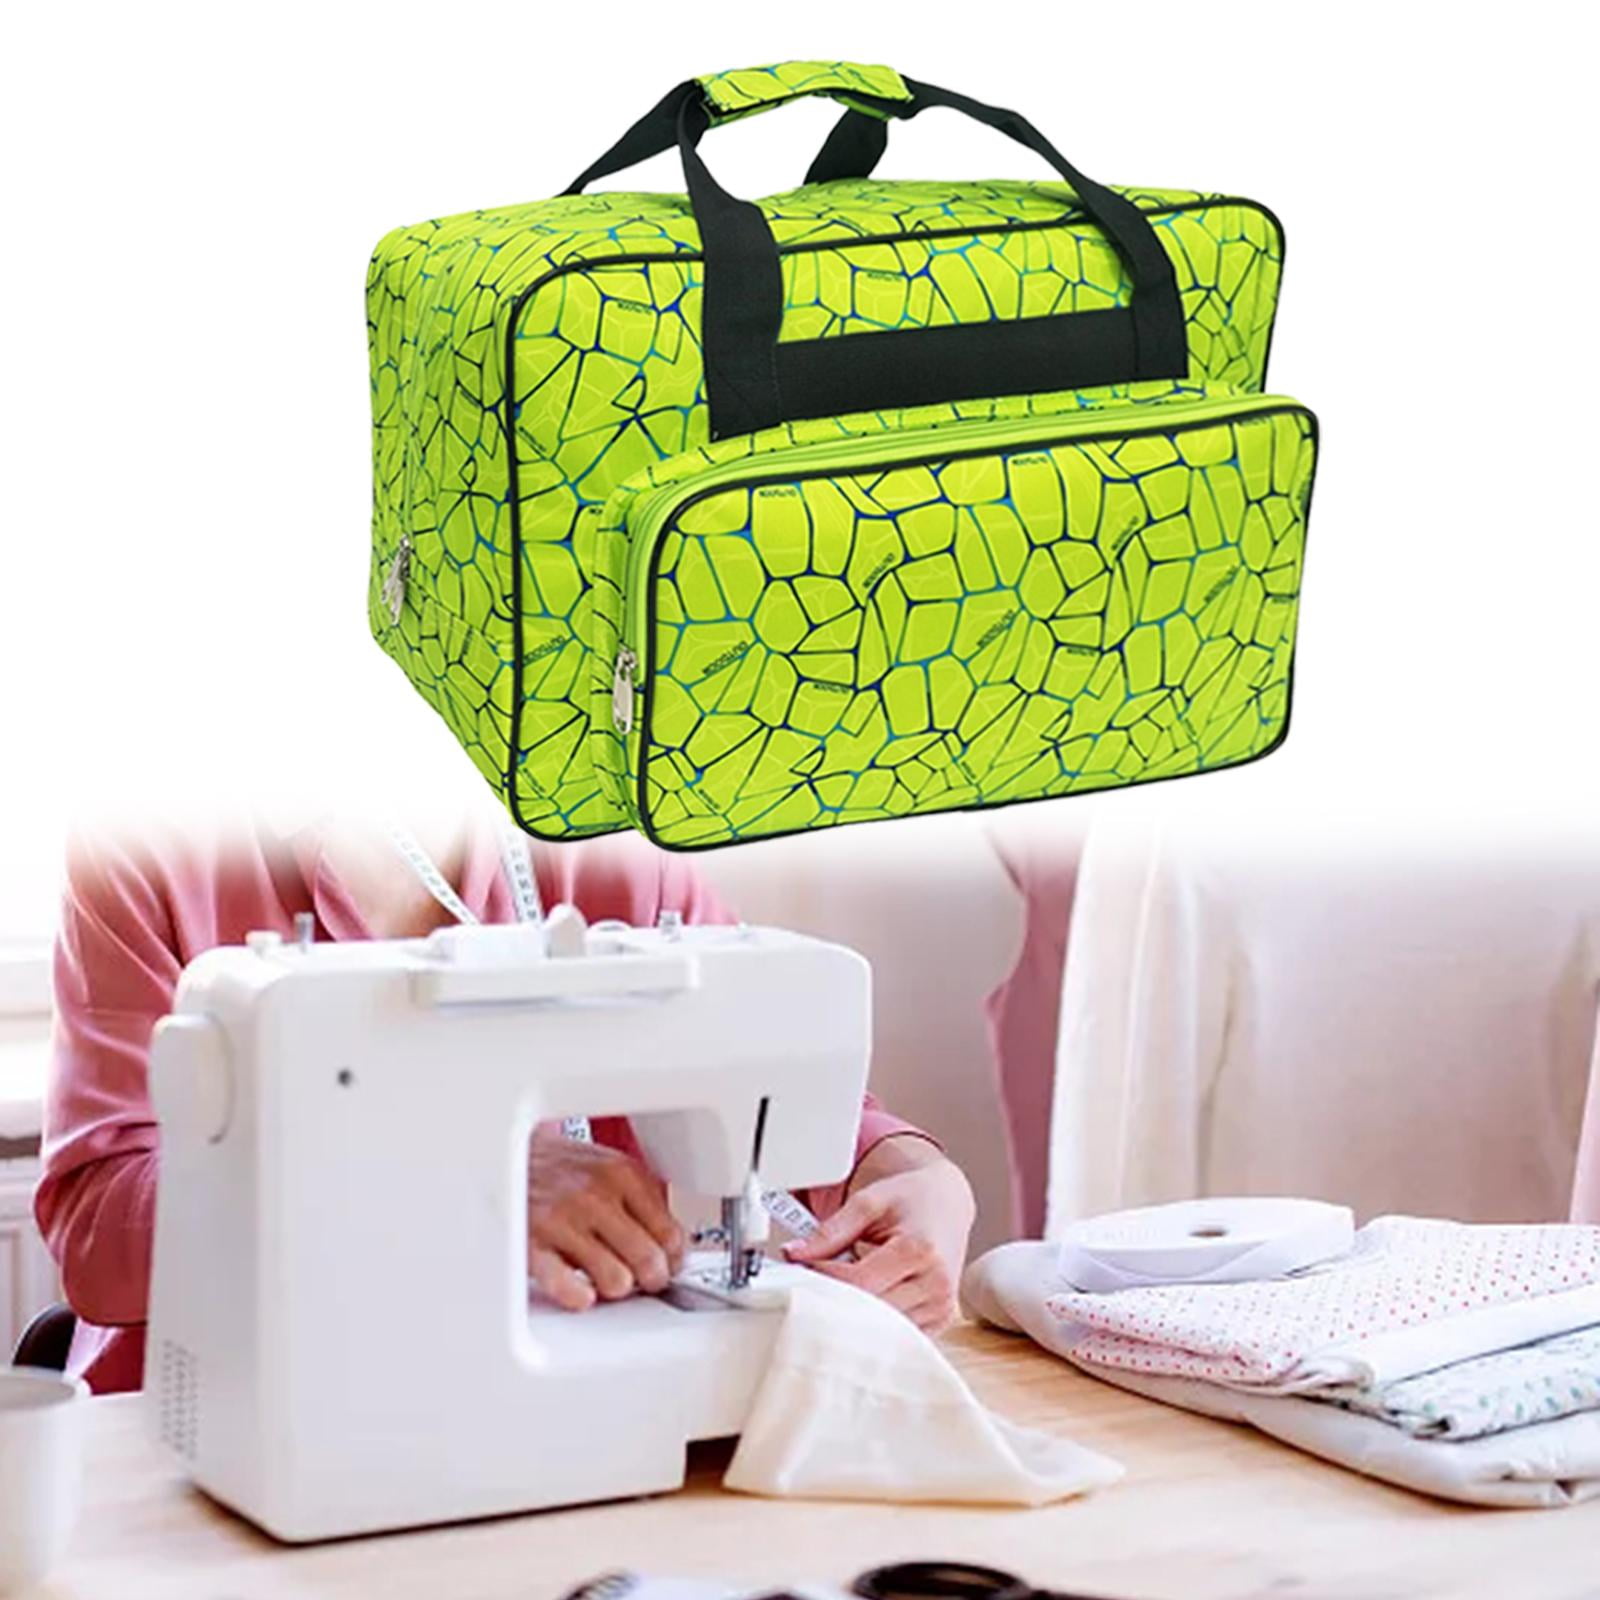 Universal Flatbed Sewing Machine Carrying Case